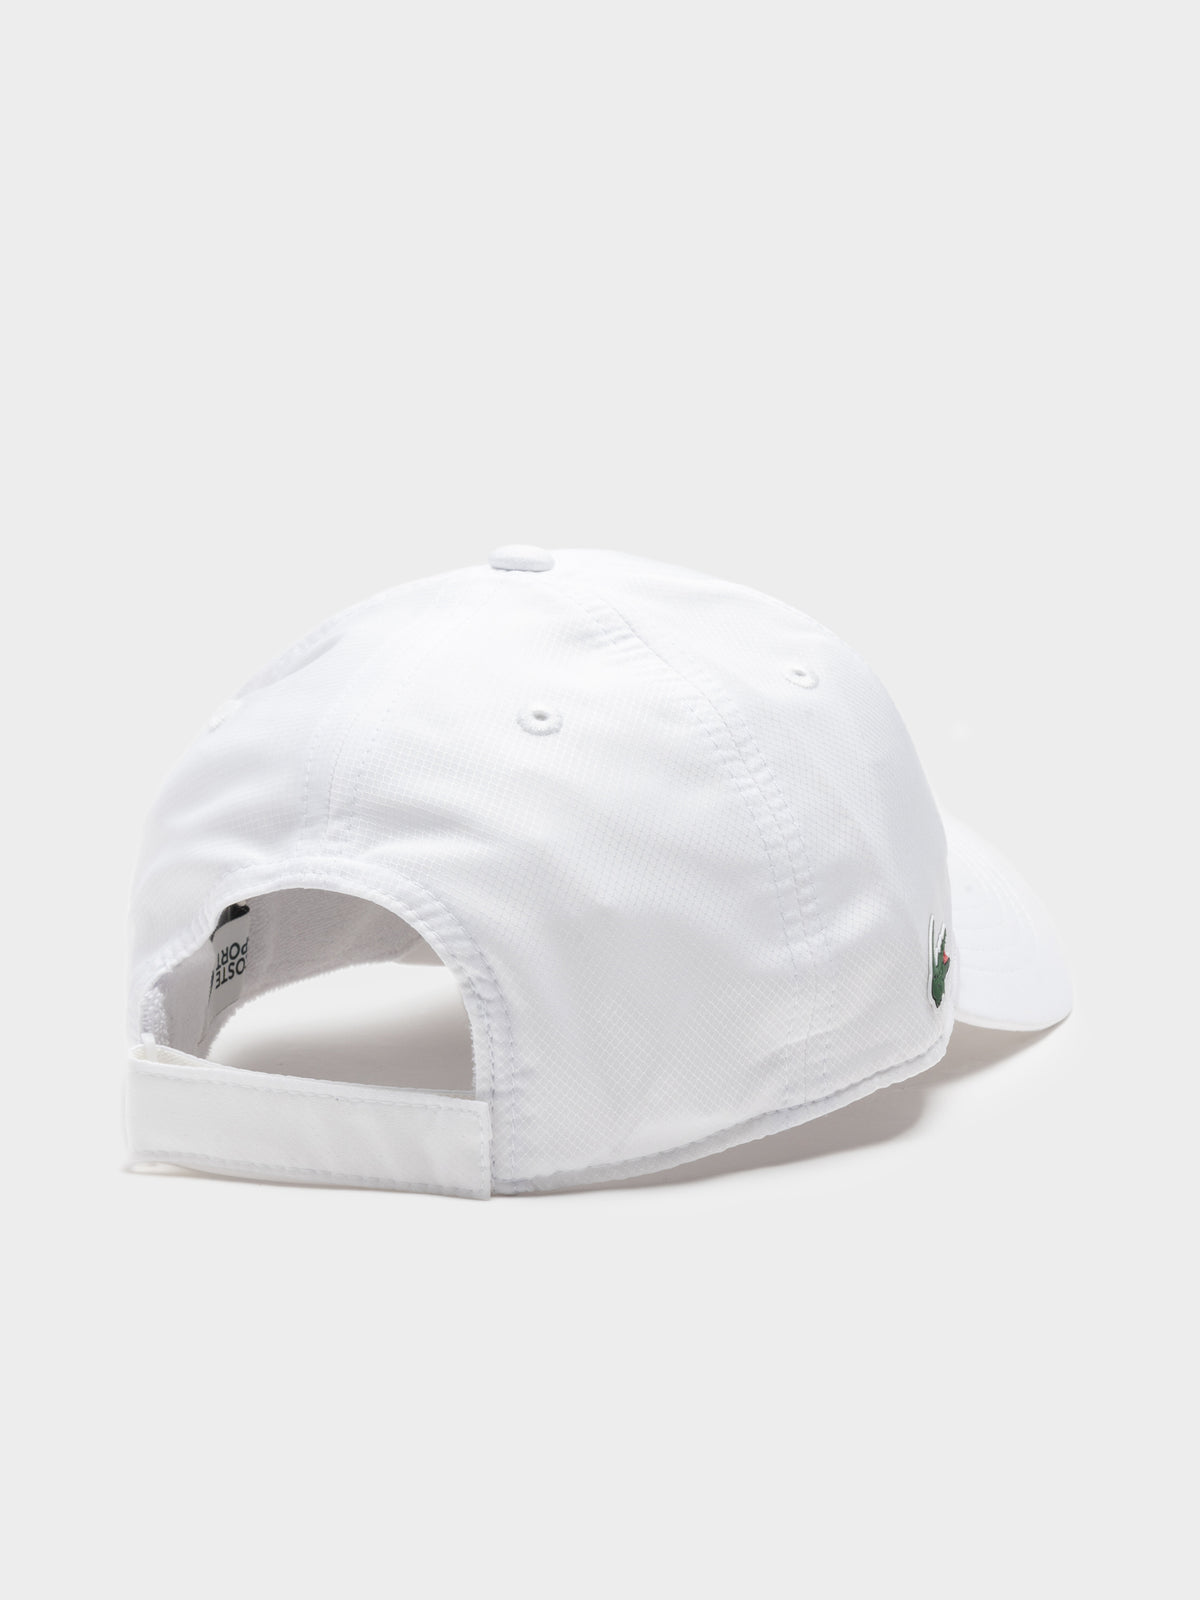 Basic Sport Dry Fit Cap in White